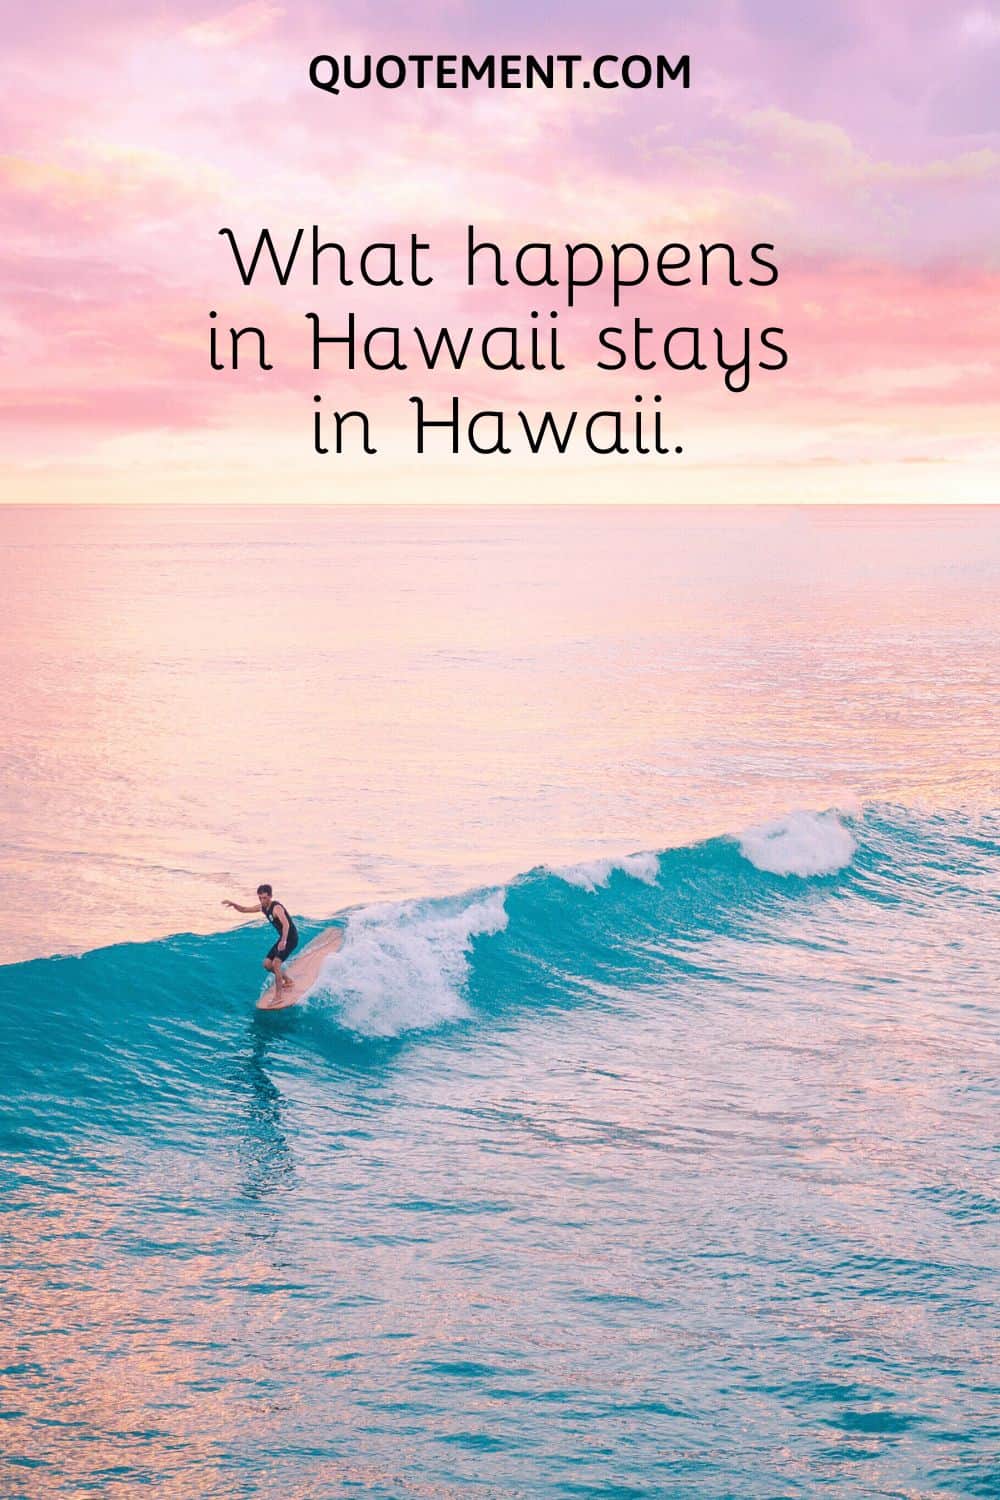 What happens in Hawaii stays in Hawaii.